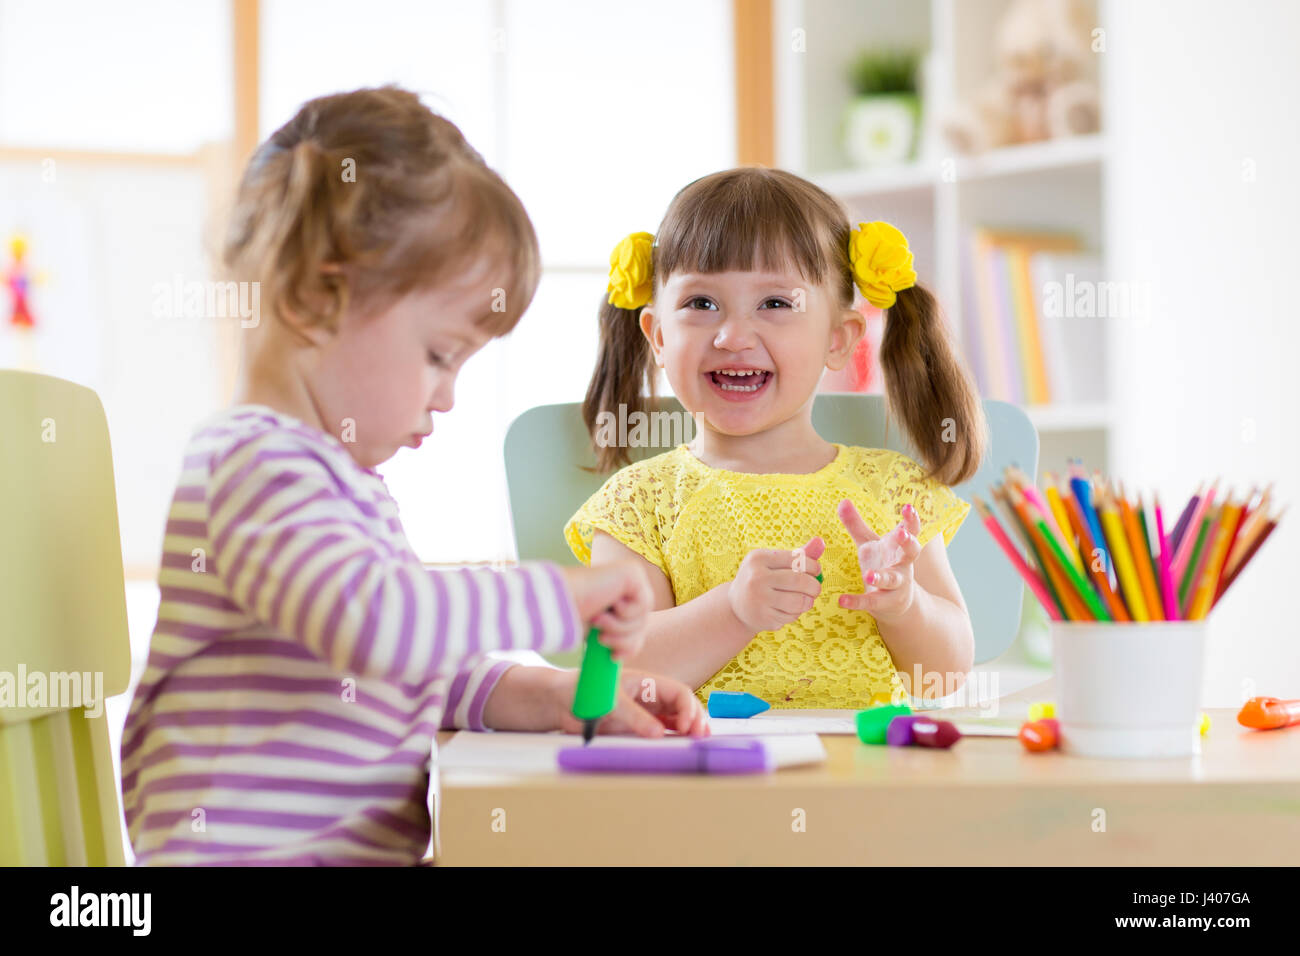 smiling kids painting at home or day care center Stock Photo